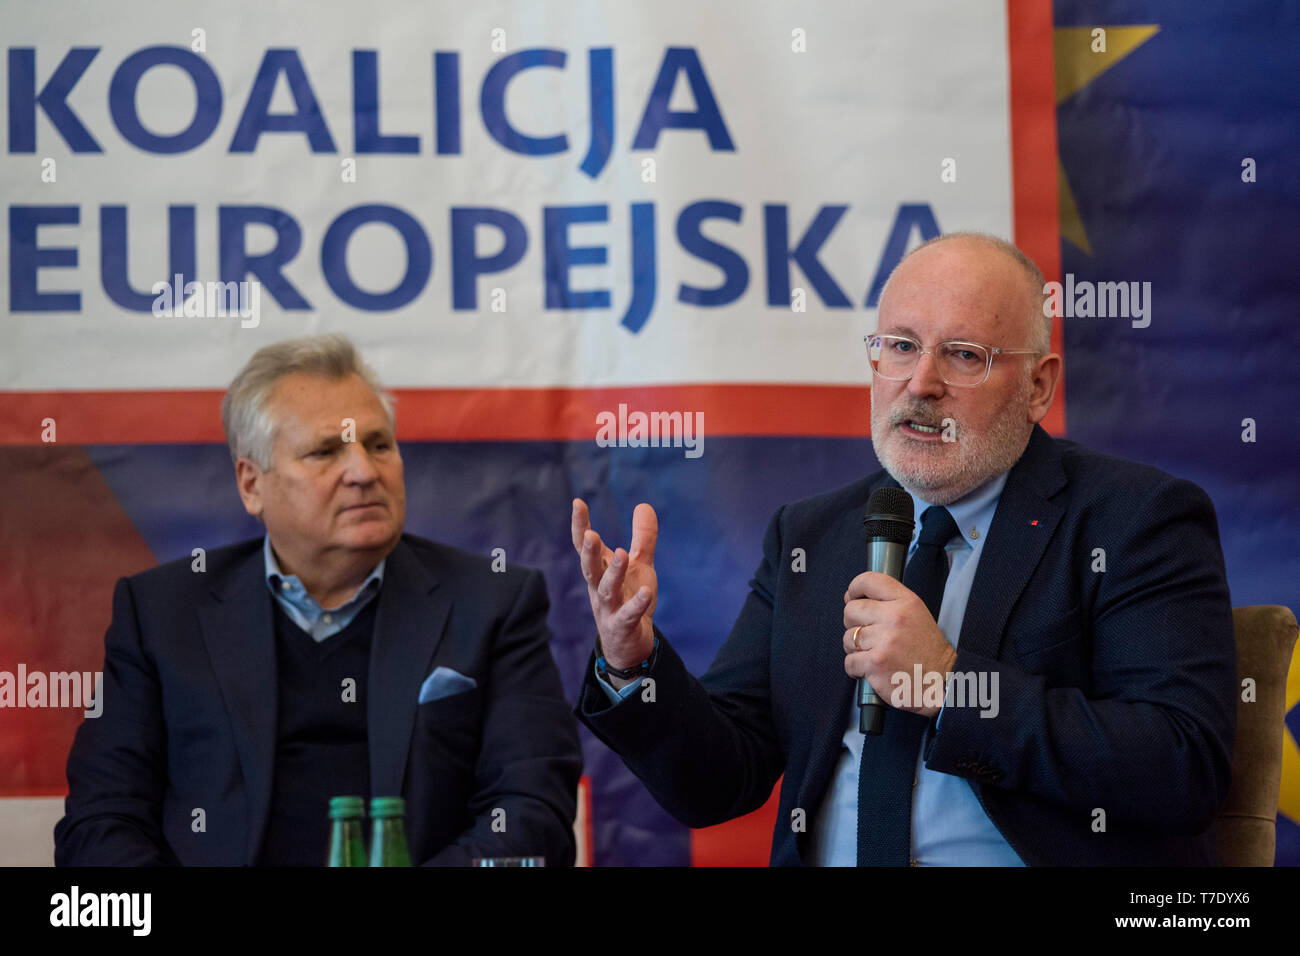 Former President of Poland - Aleksander Kwasniewski and Frans Timmermans  are seen during the debate in Warsaw. Frans Timmermans, vice-president of  the European Commission, paid a visit to Poland. Together with Wlodzimierz